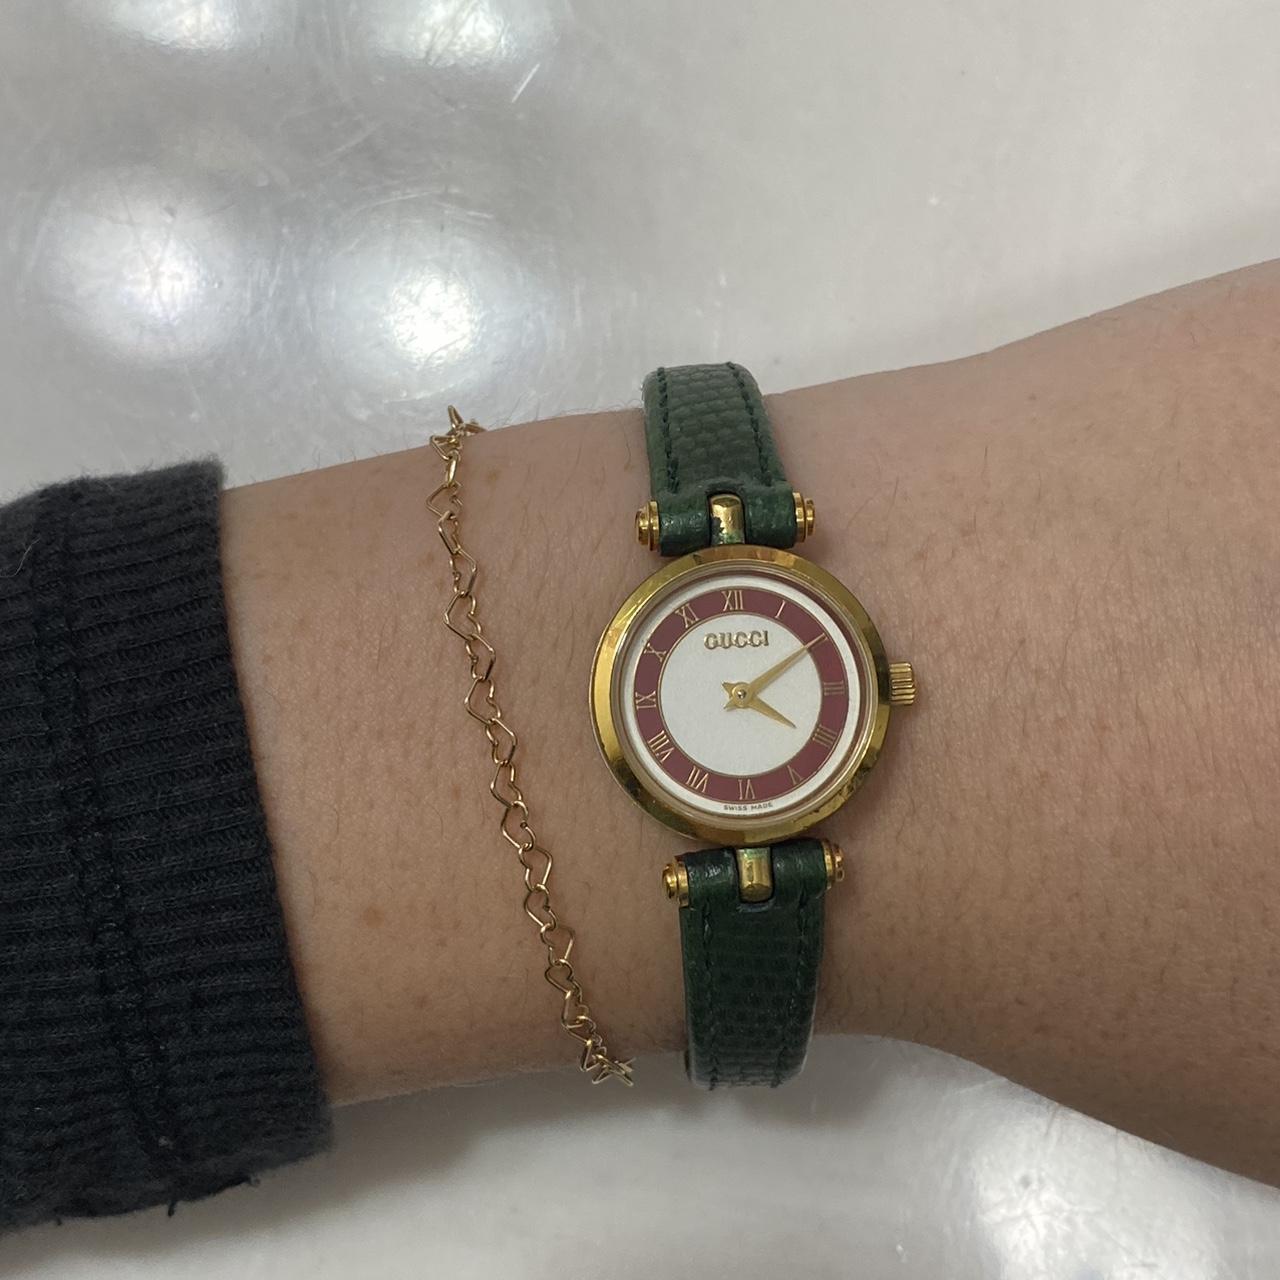 Gucci Women's Green and Red Watch (5)